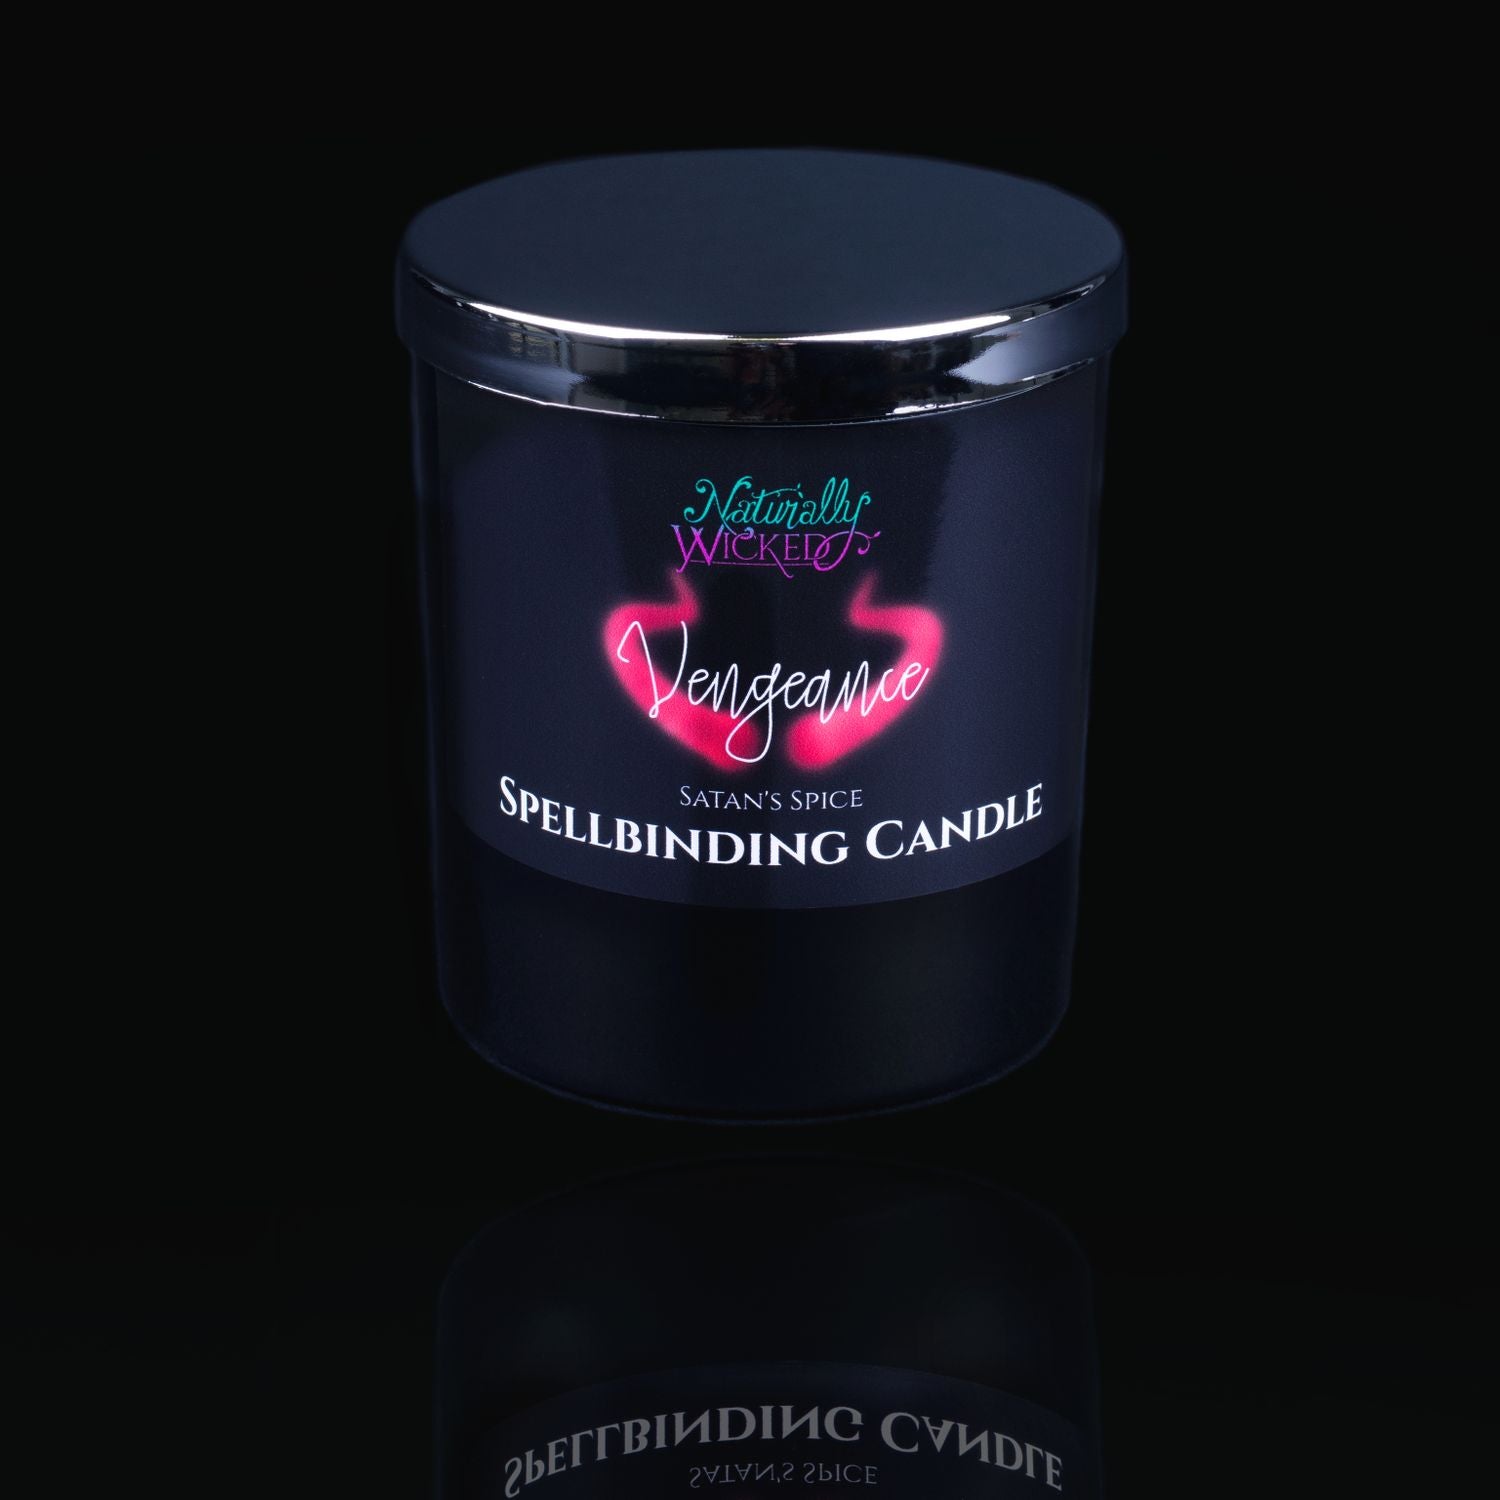 A Truly Unique Gift. Naturally Wicked Spellbinding Vengeance Spell Candle With Mirror Finished Exquisite Lid In Place. Featuring A Black Gloss Label And A Pair Of Red Glowing Devil Horns